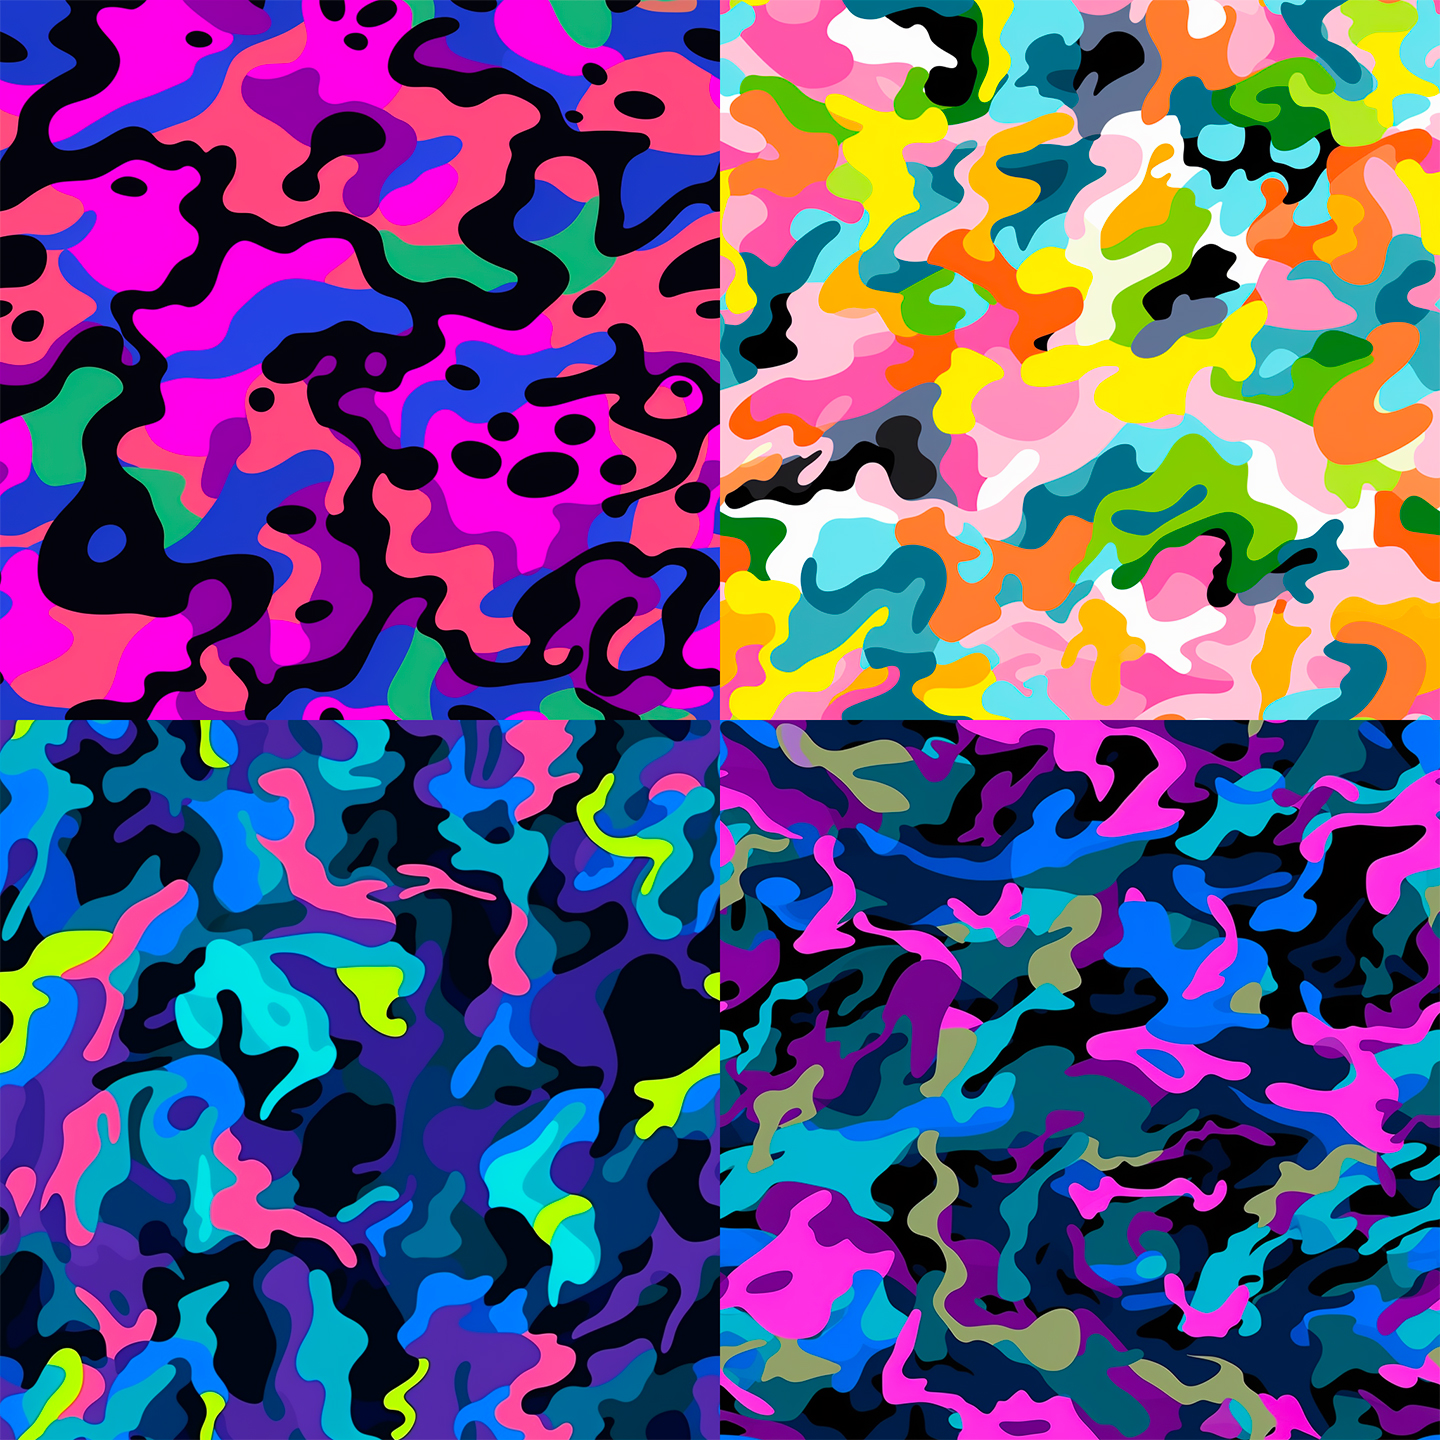 Midjourney's prompts let you generate stunning camouflage patterns